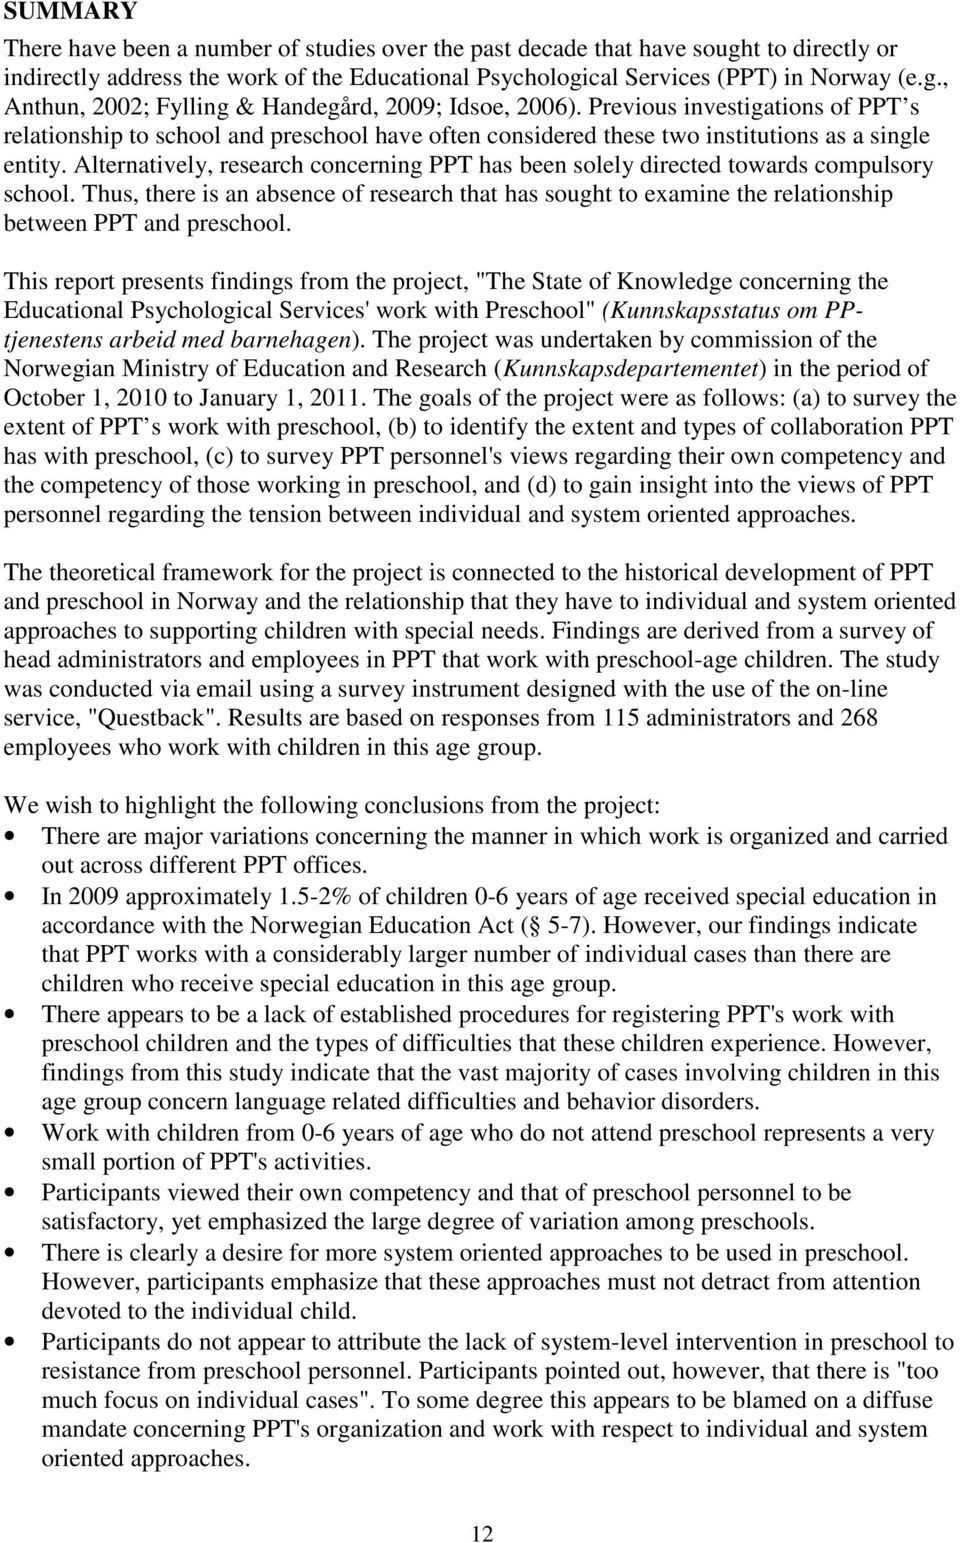 Alternatively, research concerning PPT has been solely directed towards compulsory school. Thus, there is an absence of research that has sought to examine the relationship between PPT and preschool.